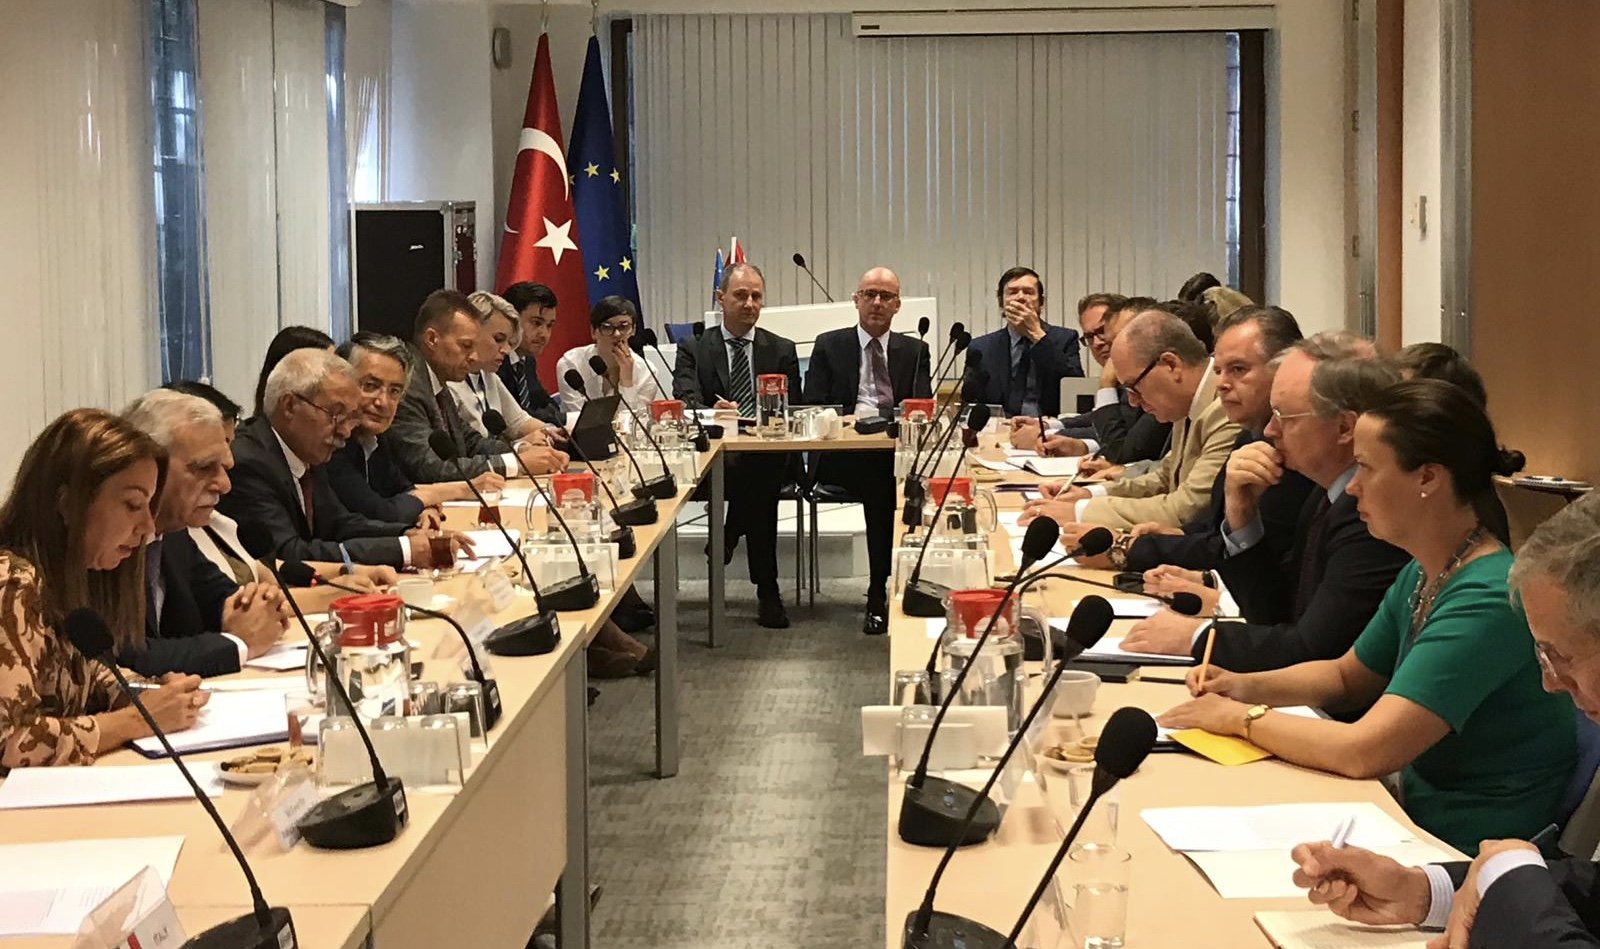 Picture from the EU Delegation Turkey Twitter account